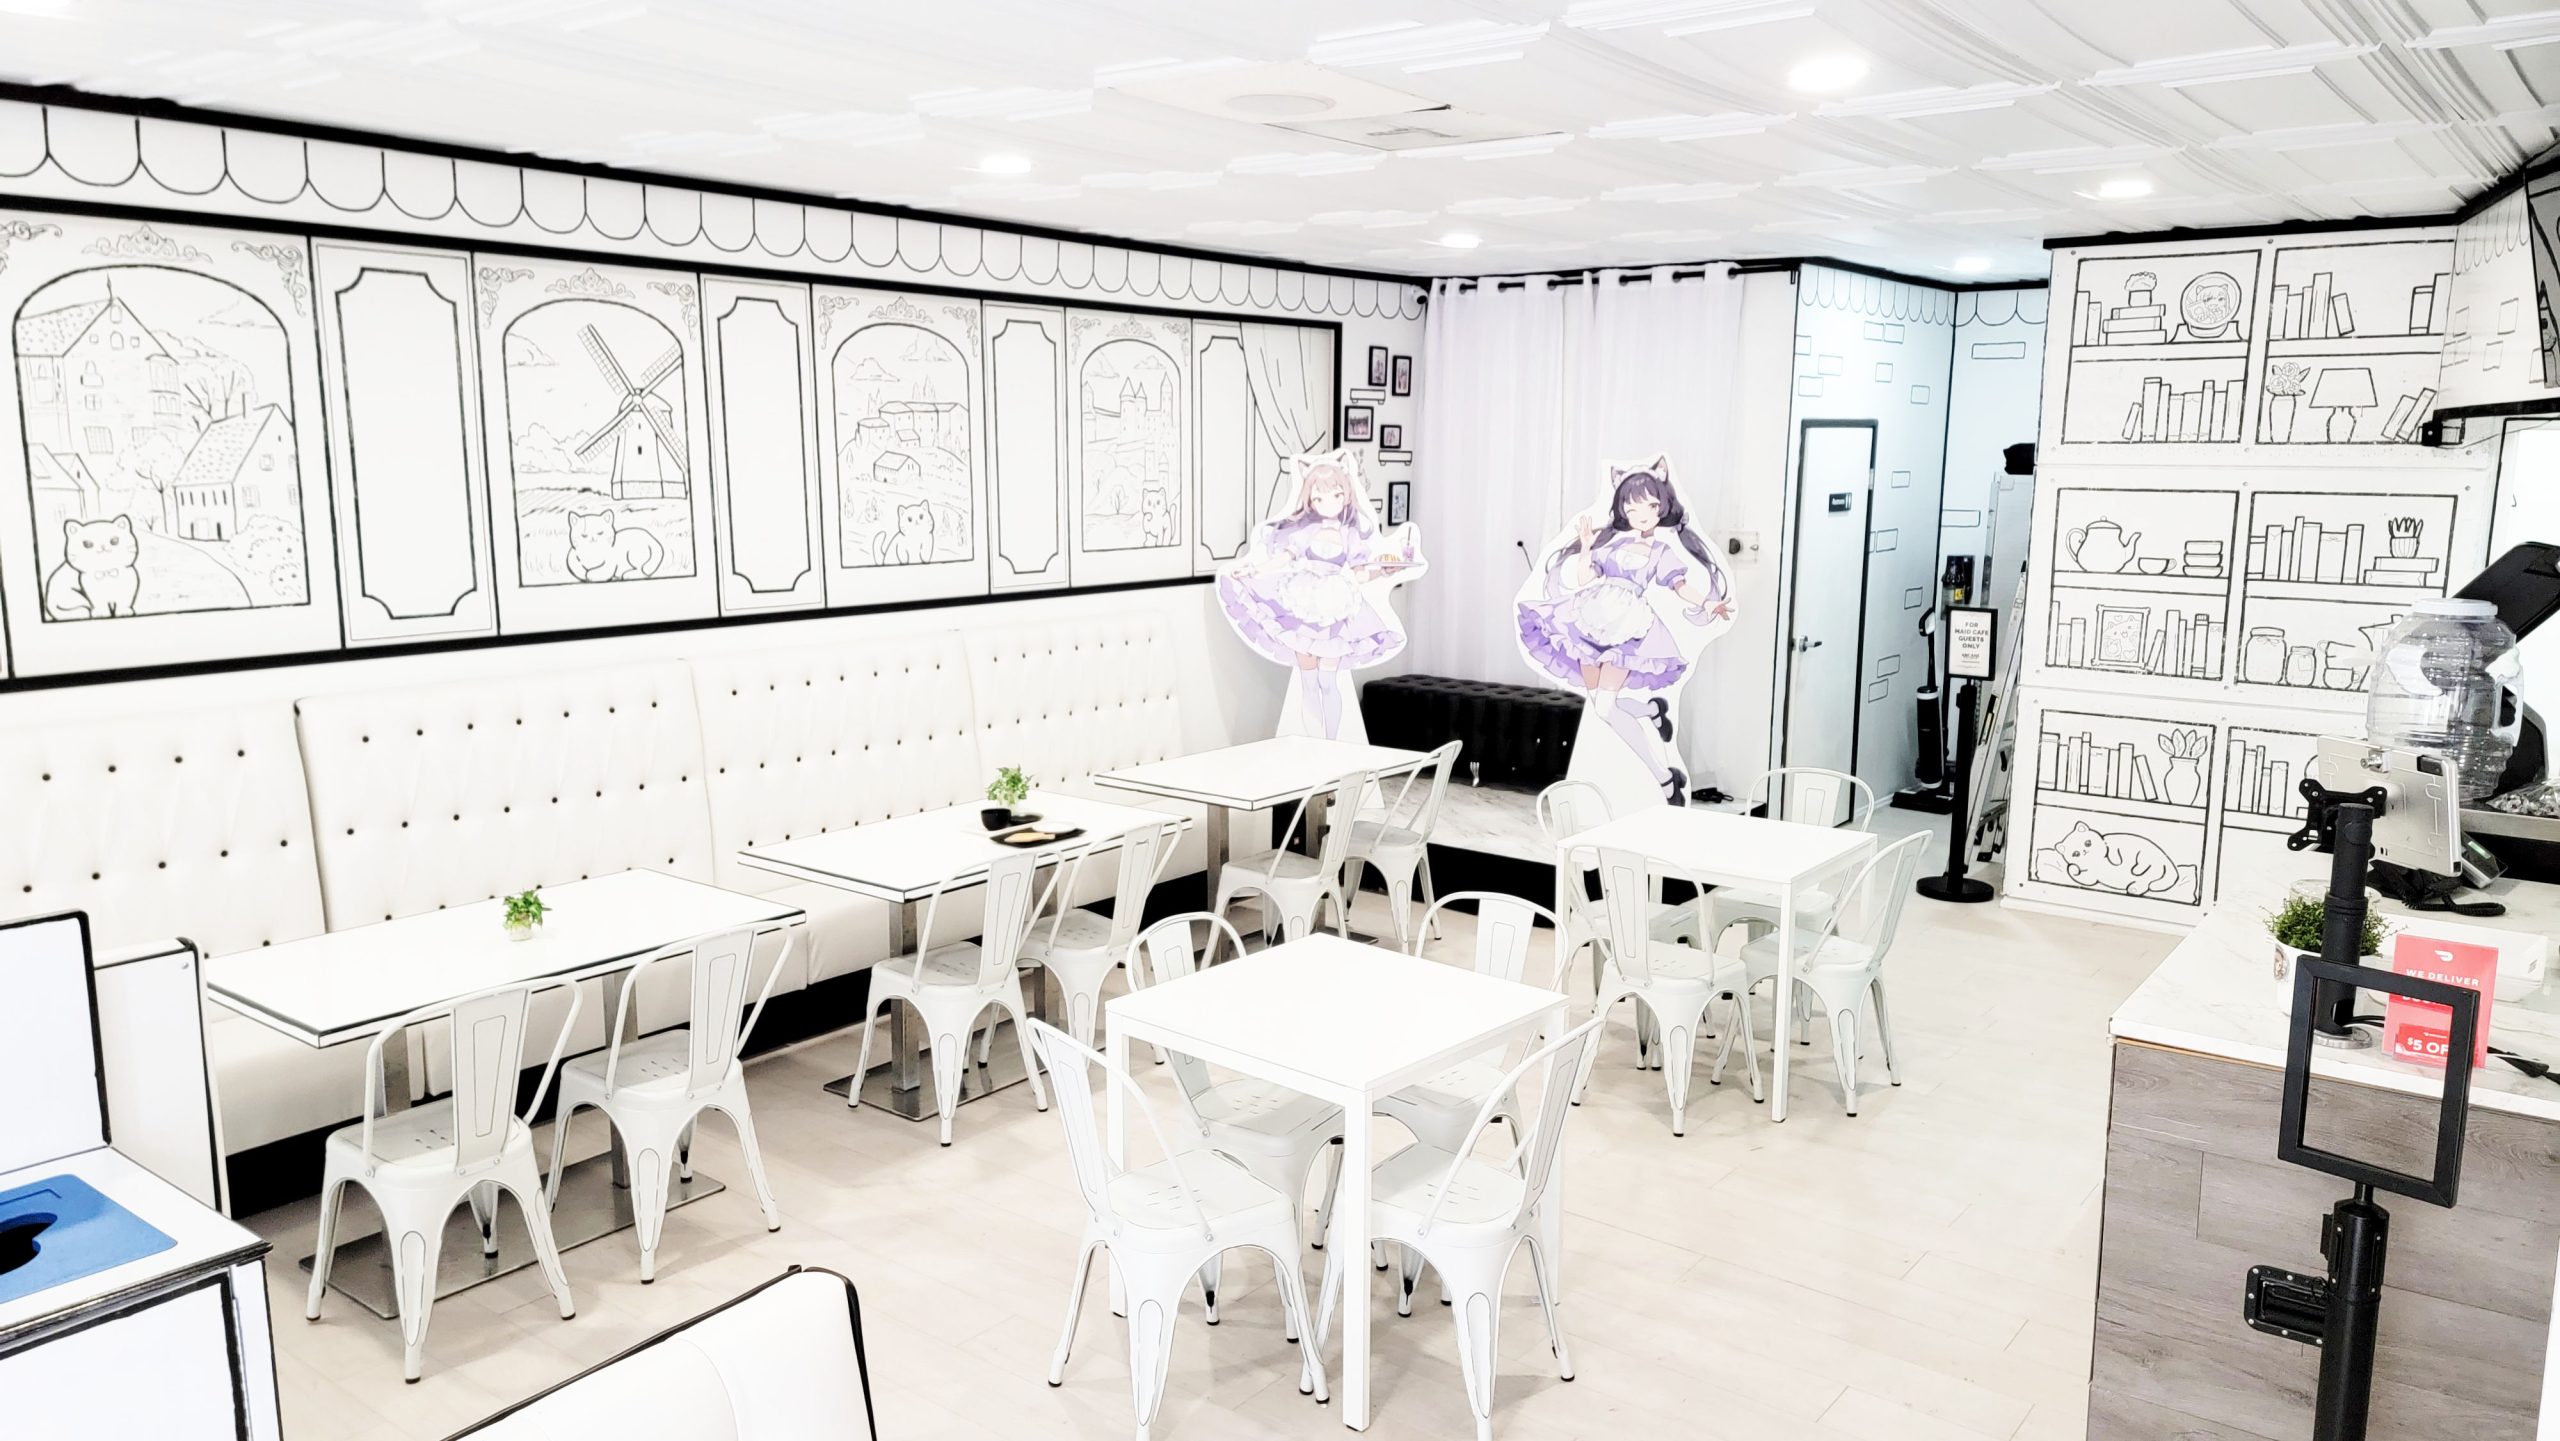 Interior of American Maid Cafe Arcane Maid Cafe in Los Angeles